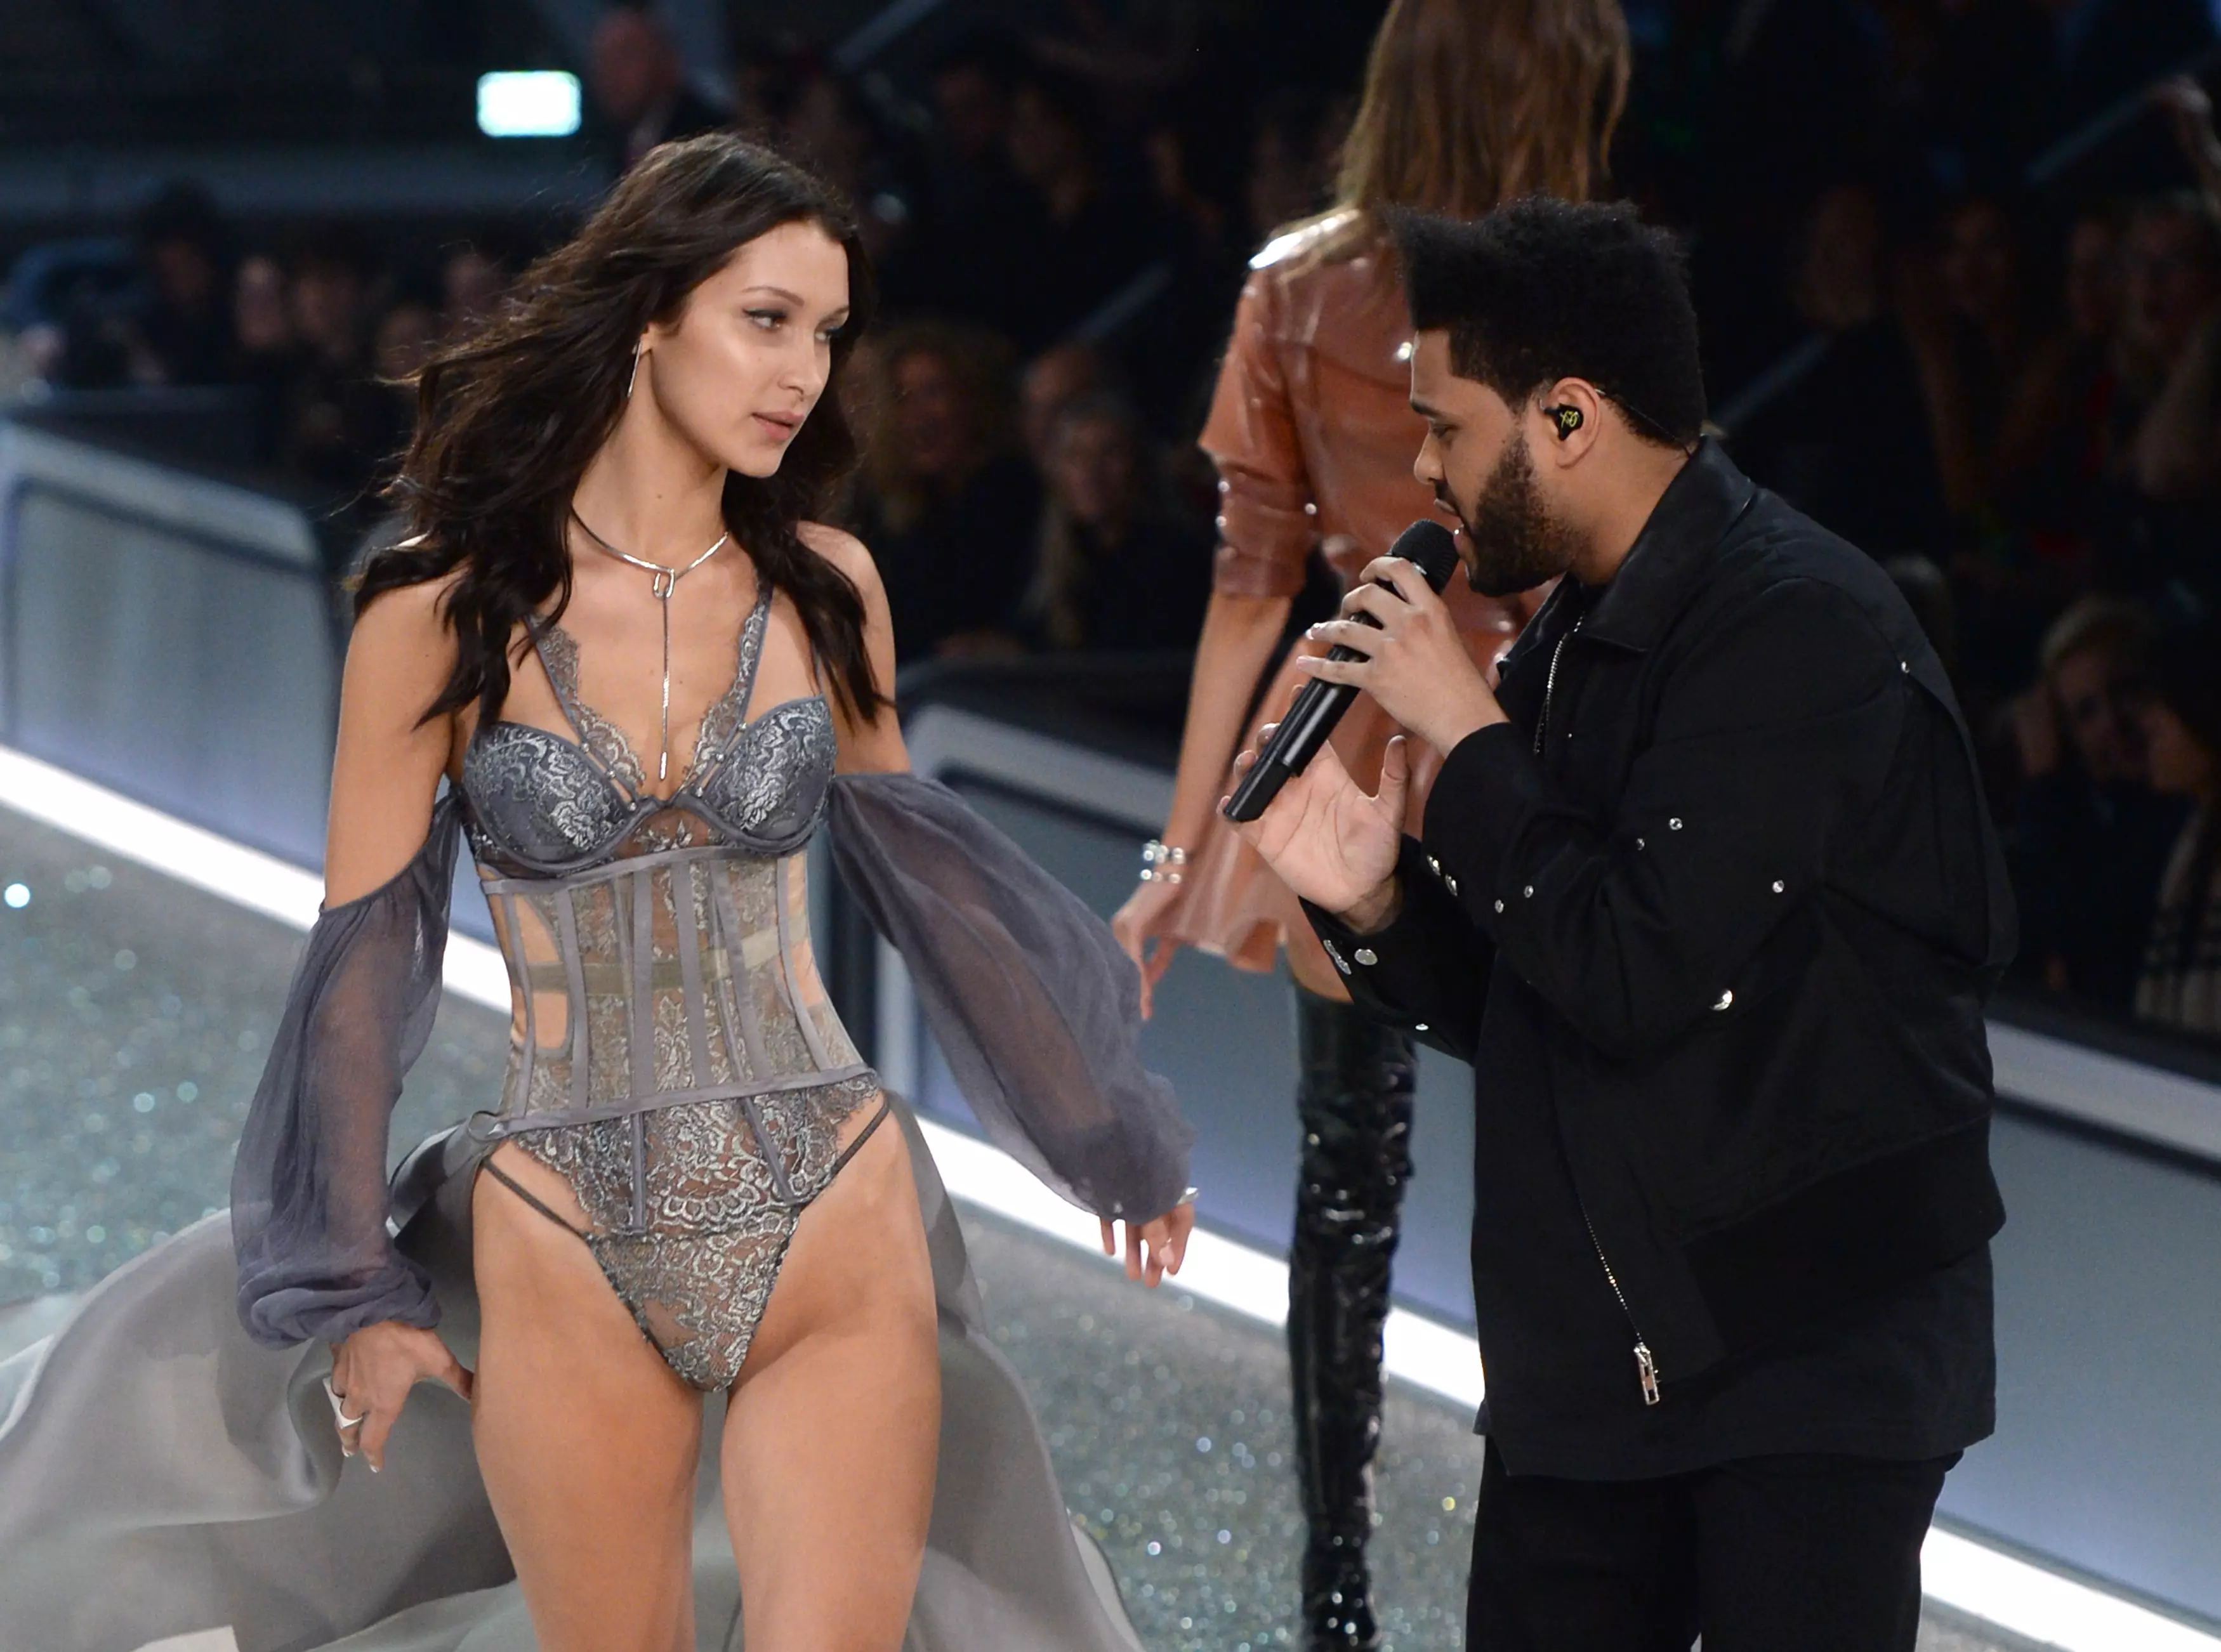 Bella Hadid and The Weeknd at the Victoria's Secret Fashion Show 2016 '